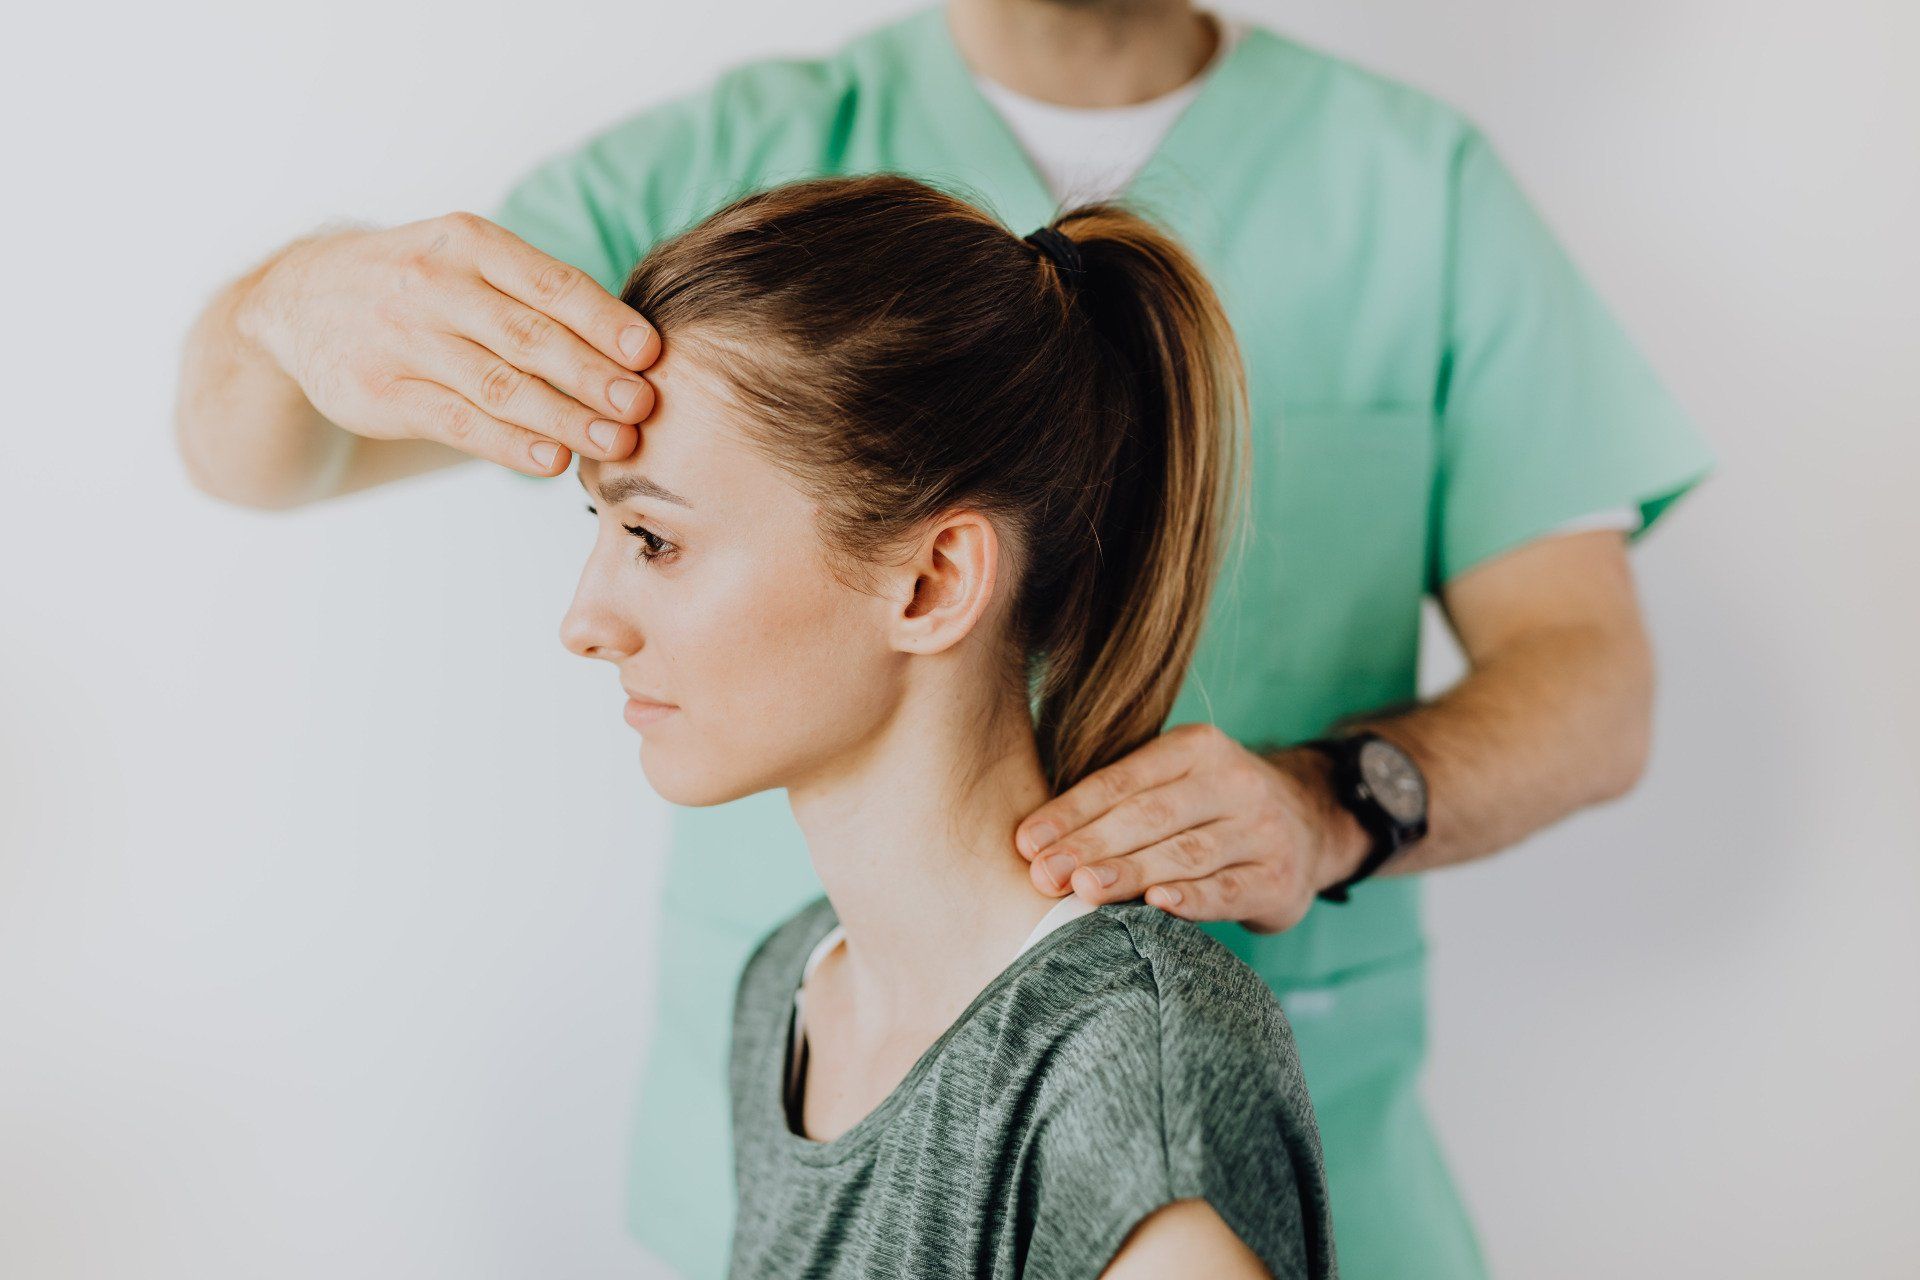 Chiropractor examination of head and neck due to chronic headache complaint.